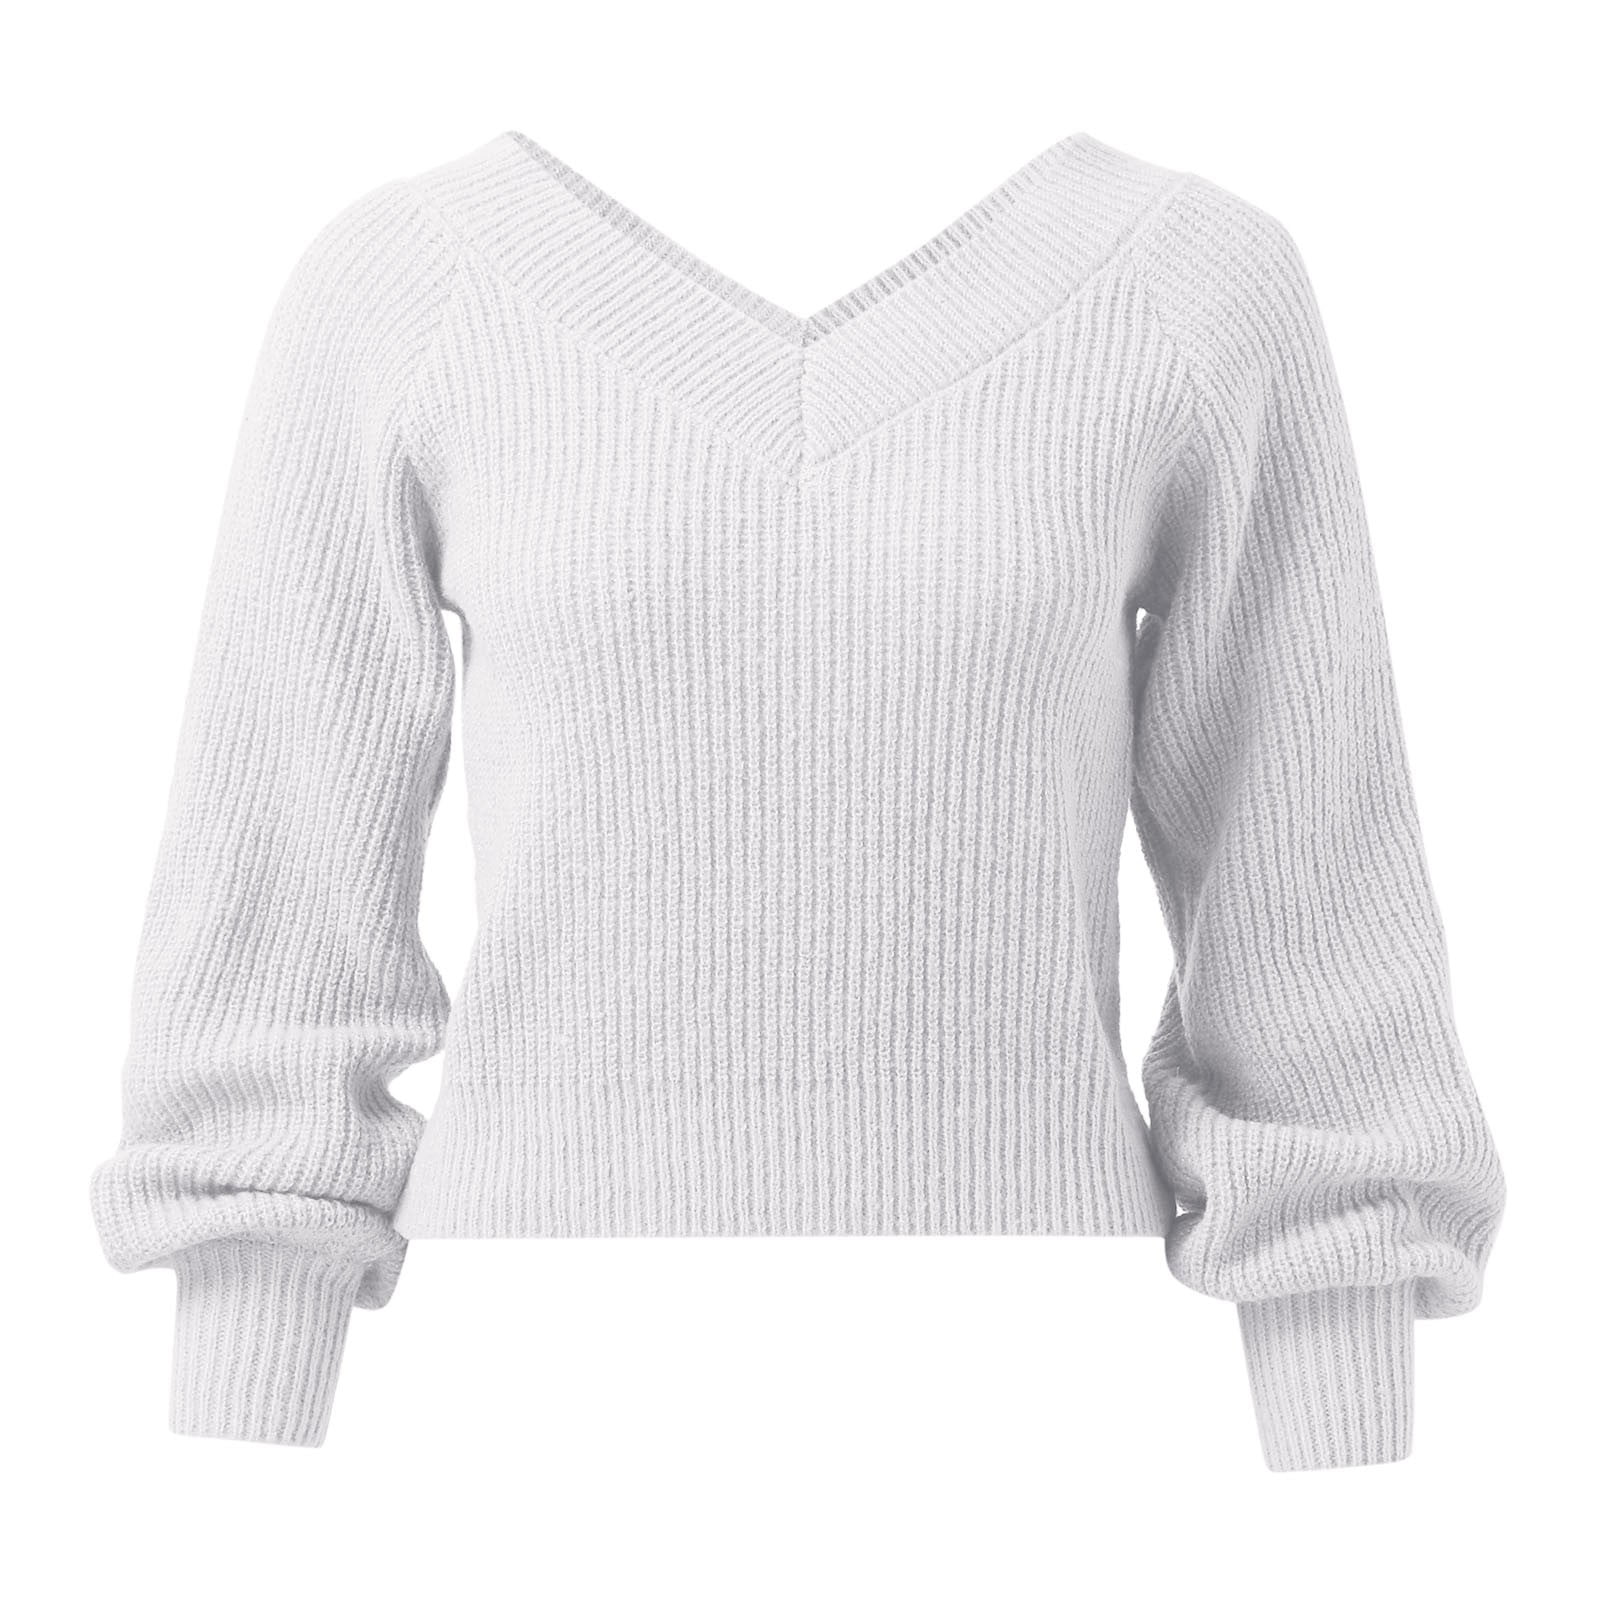 Aayomet Cardigan For Women Fall Knitted Sweater Tops for